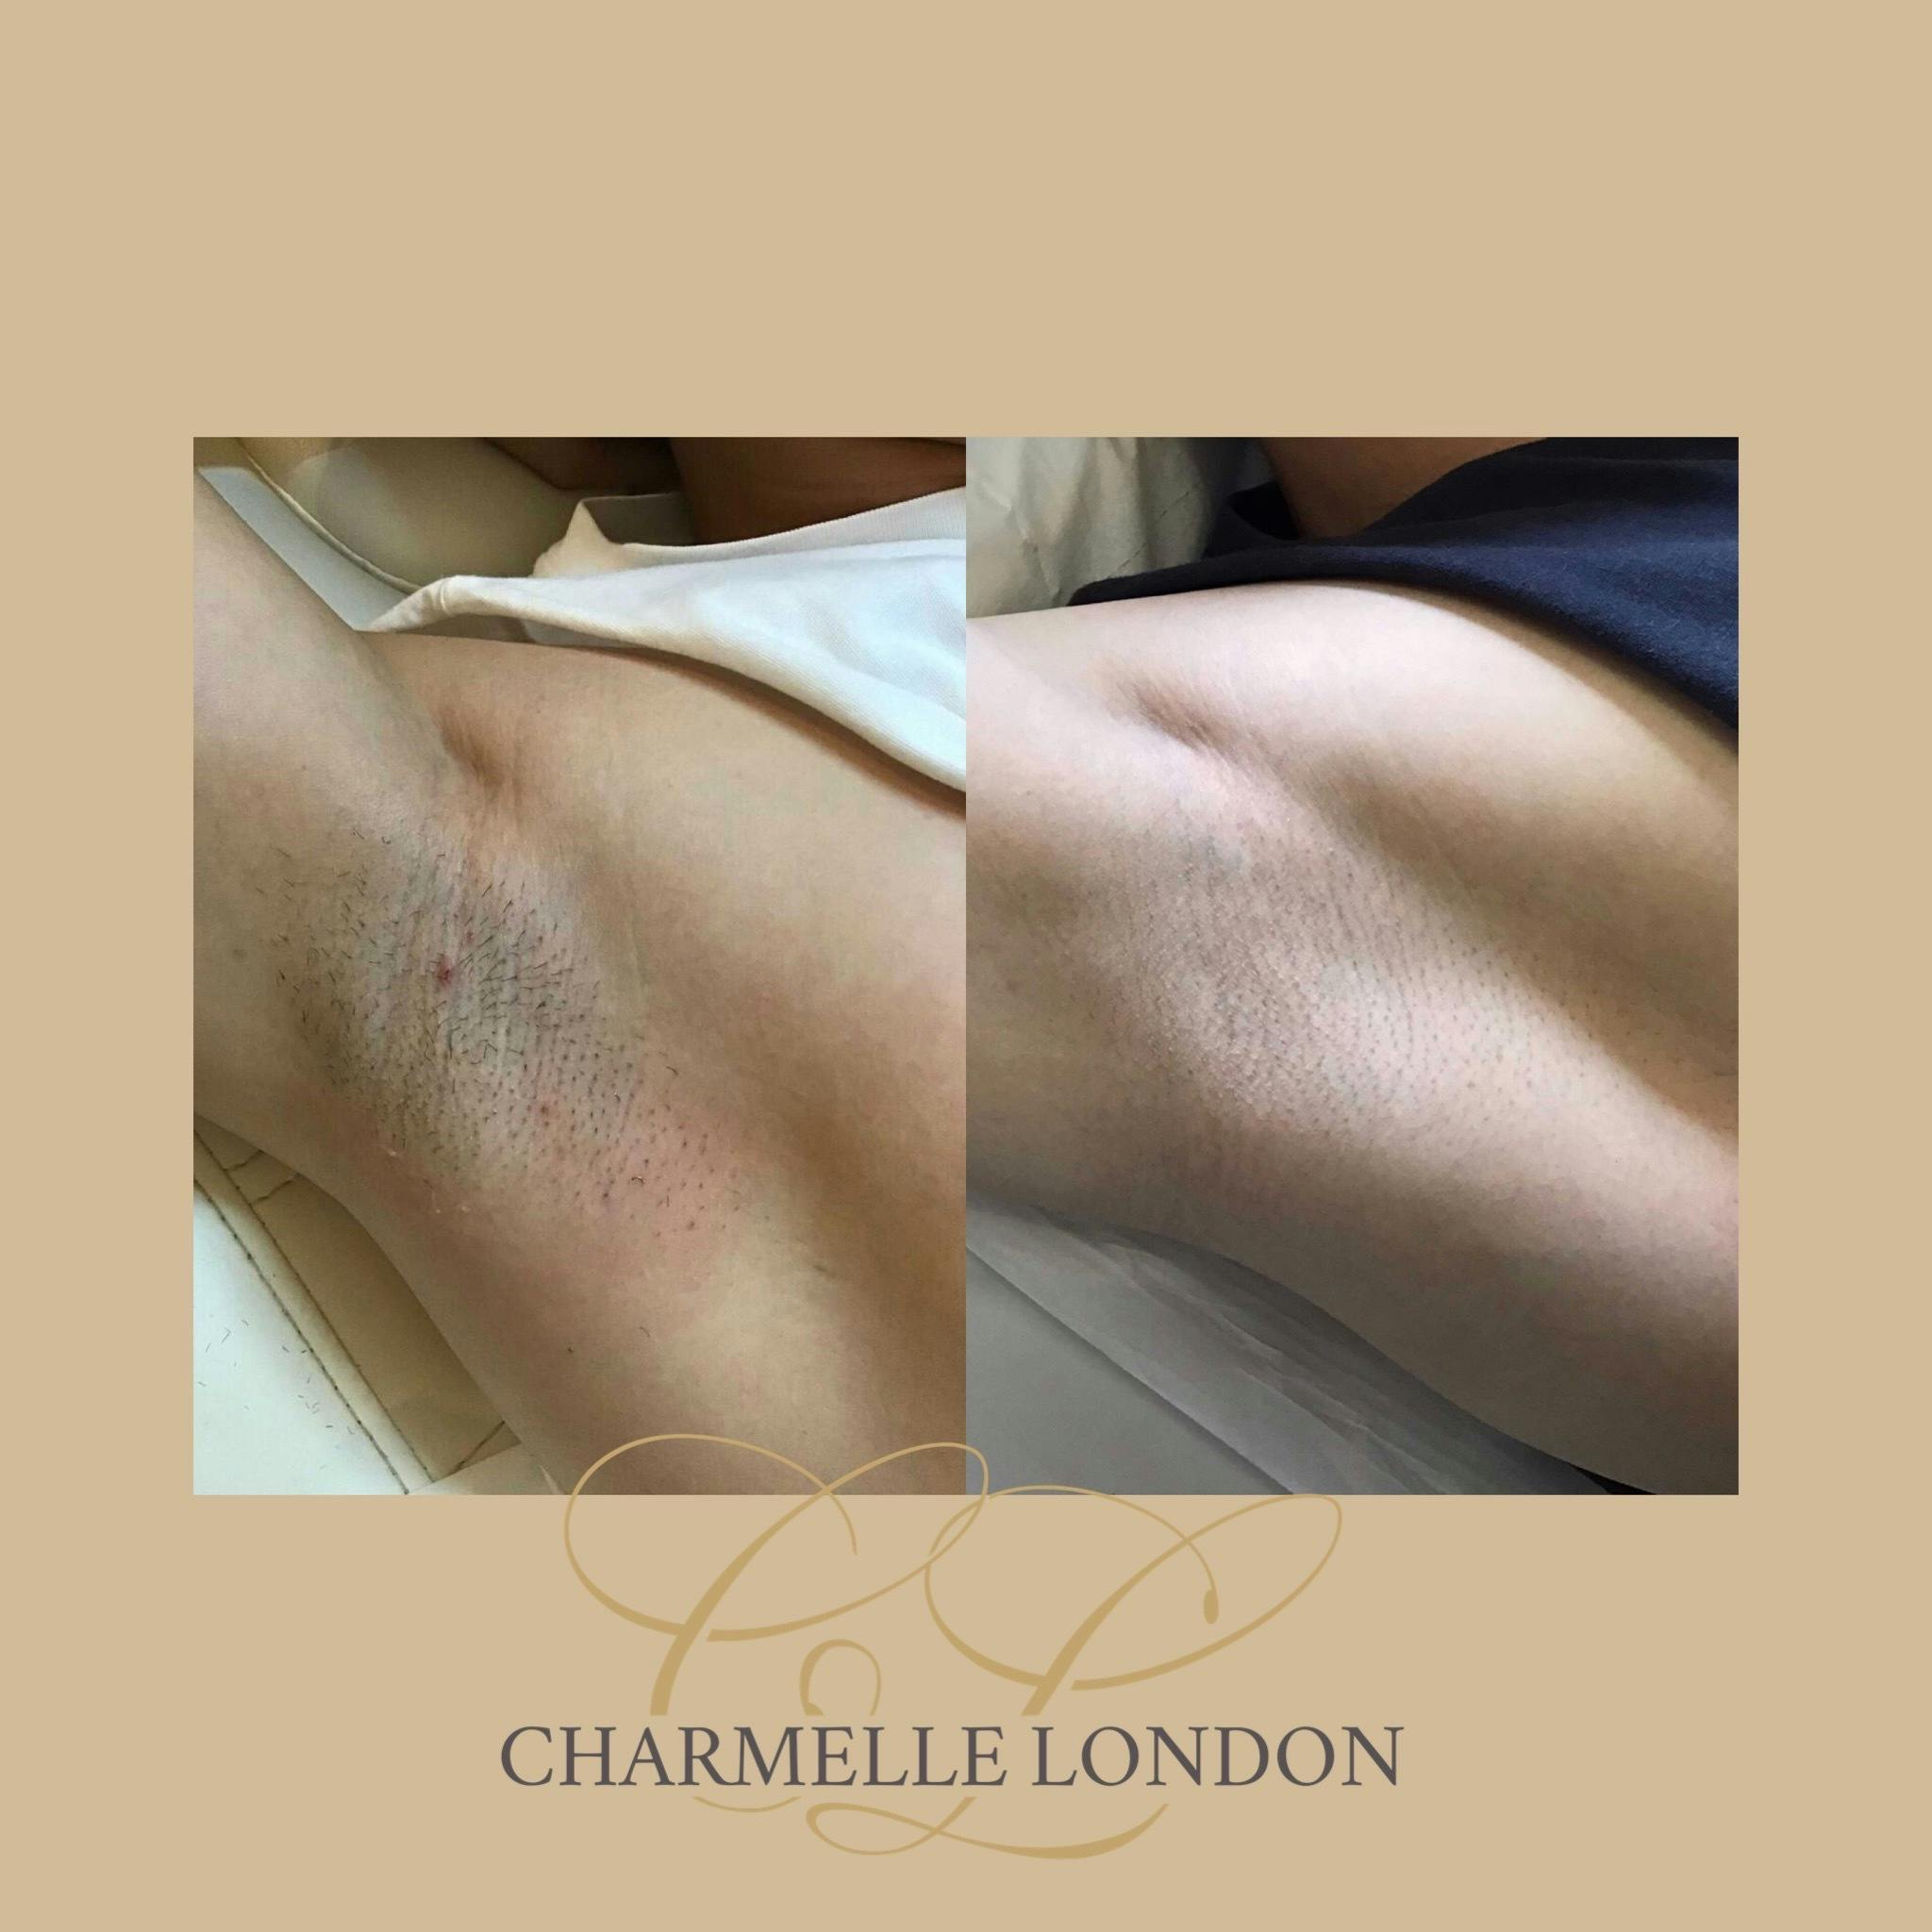 Laser Hair Removal Experience the ultimate in hair removal with our medical-grade Laser Hair Removal treatment. Suitable for all skin types, it delivers long-lasting results with no downtime. Book your session today at Charmelle London.